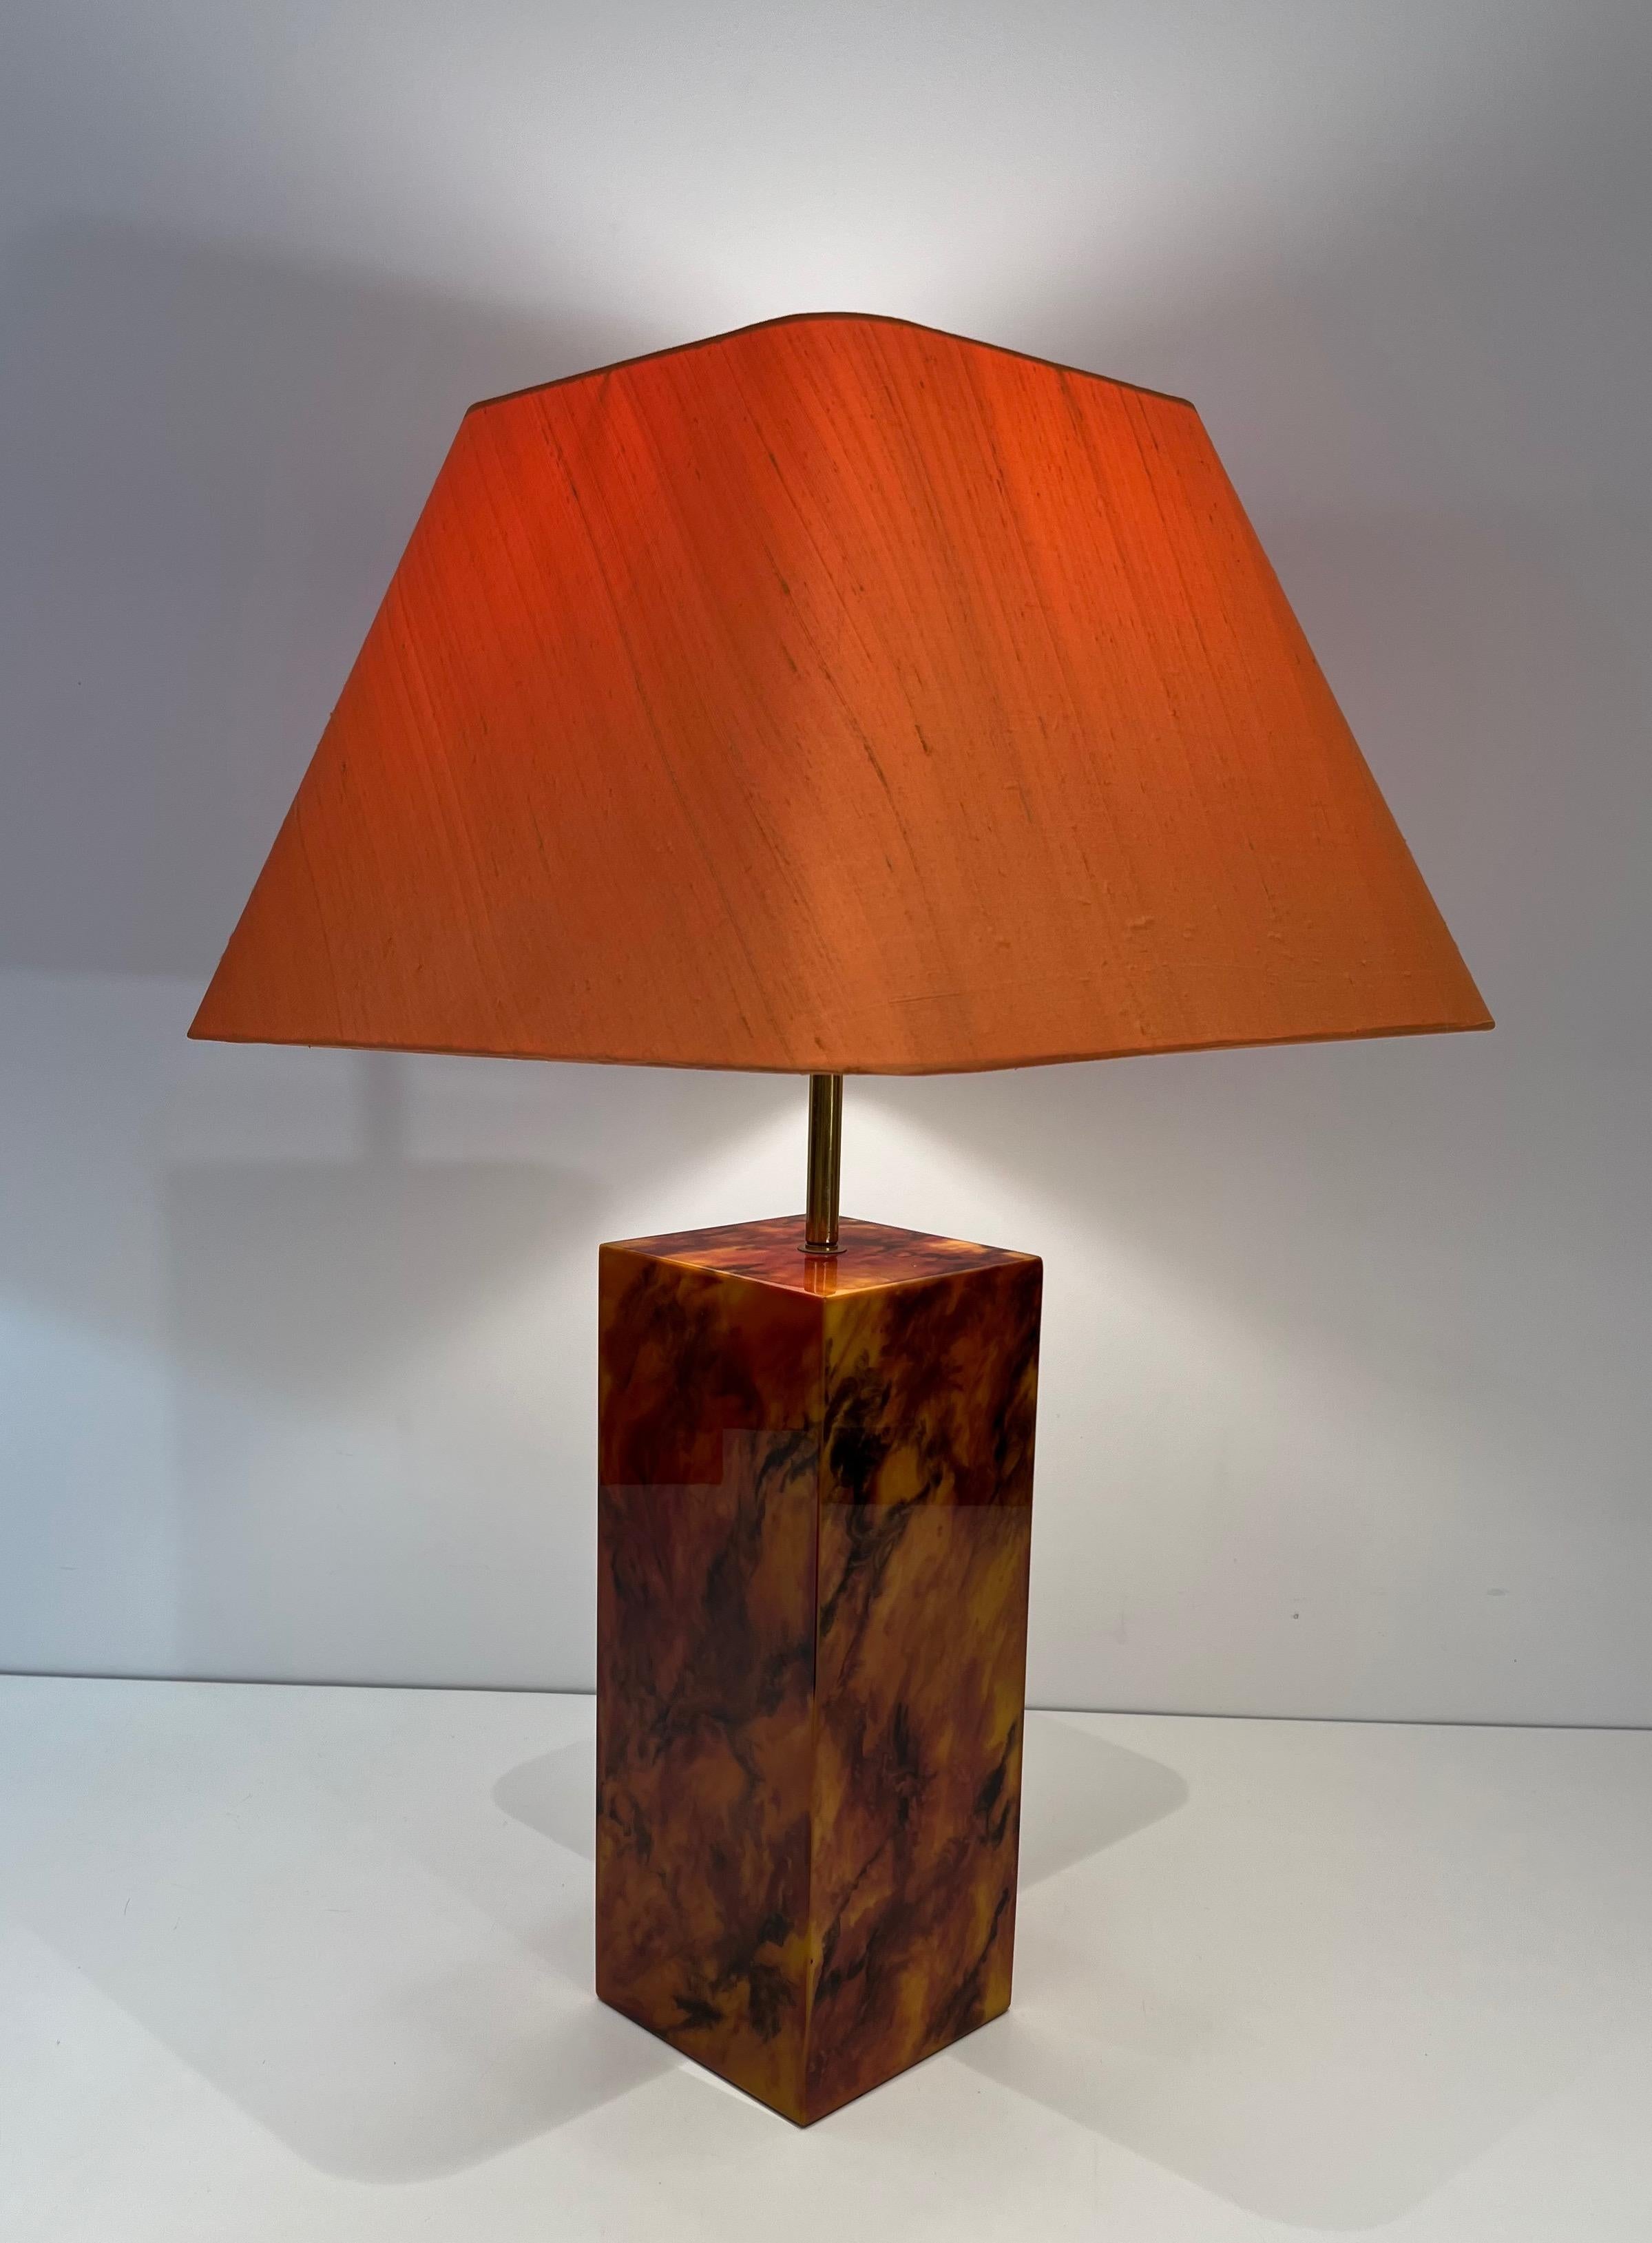 Pair of Lucite Lamps Imitating Tortoise Shell. French work. Circa 1970 For Sale 2